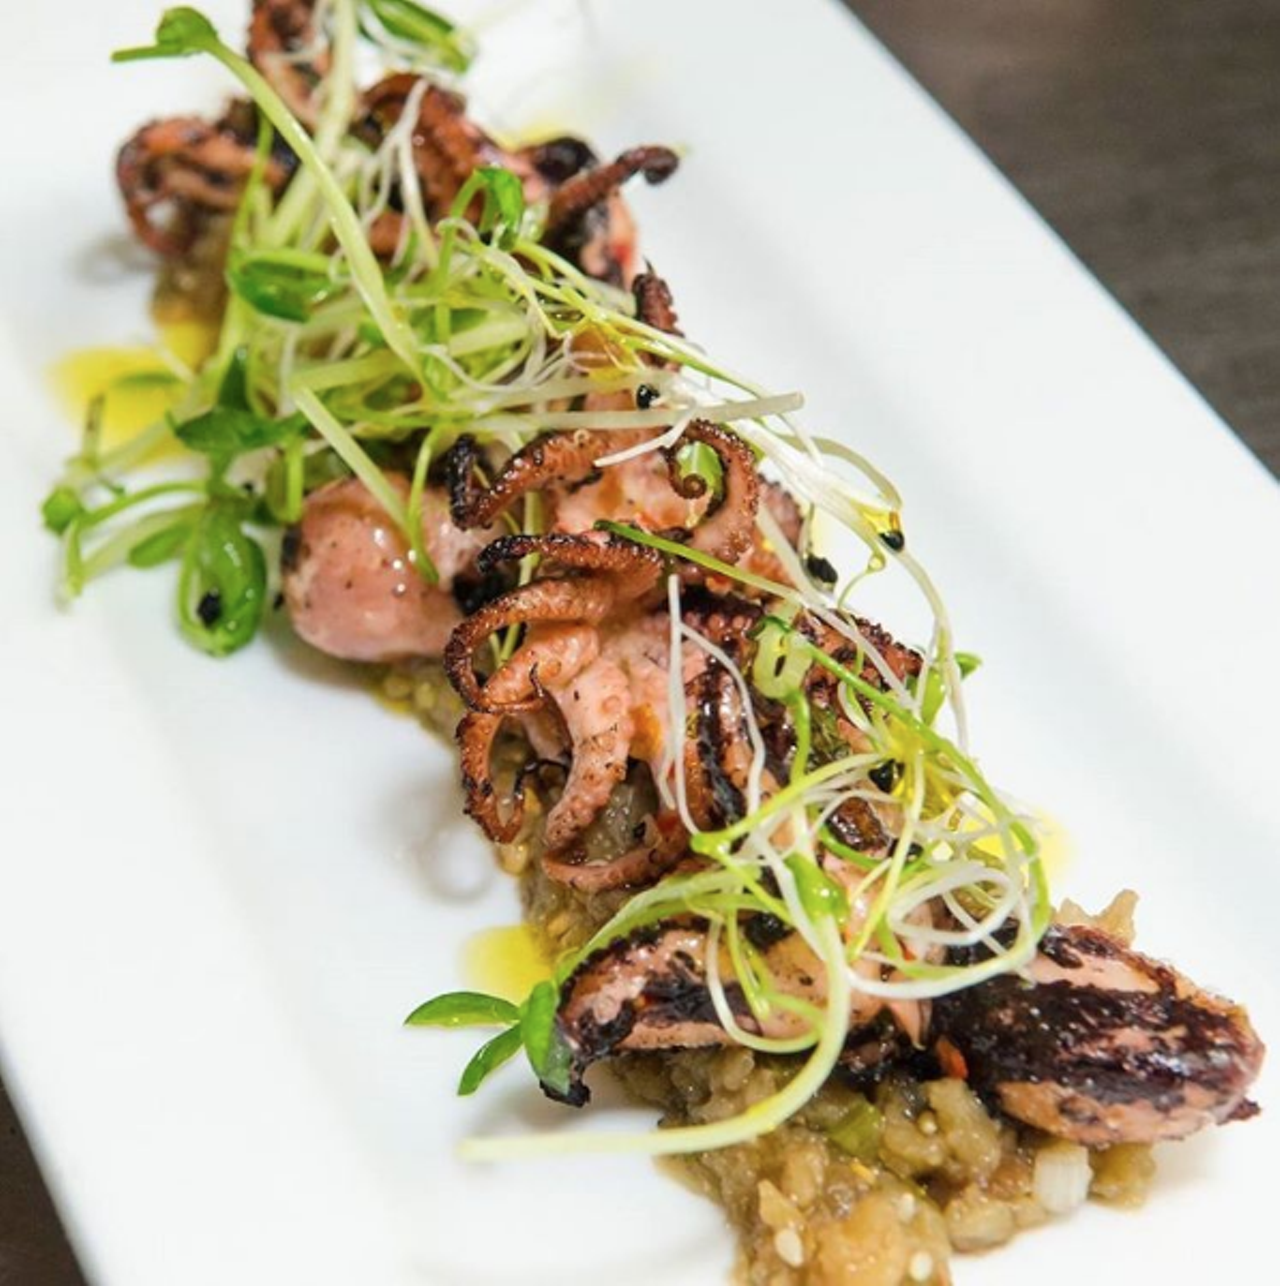  Grilled Baby Octopus at Cuba Libre
Baby octopus is not exactly an inexpensive ingredient, plus it&#146;s marinated in truffles, which increases your buck bang.
9101 International Drive,  407-226-1600
Photo via cubalibrerestaurant/Instagram